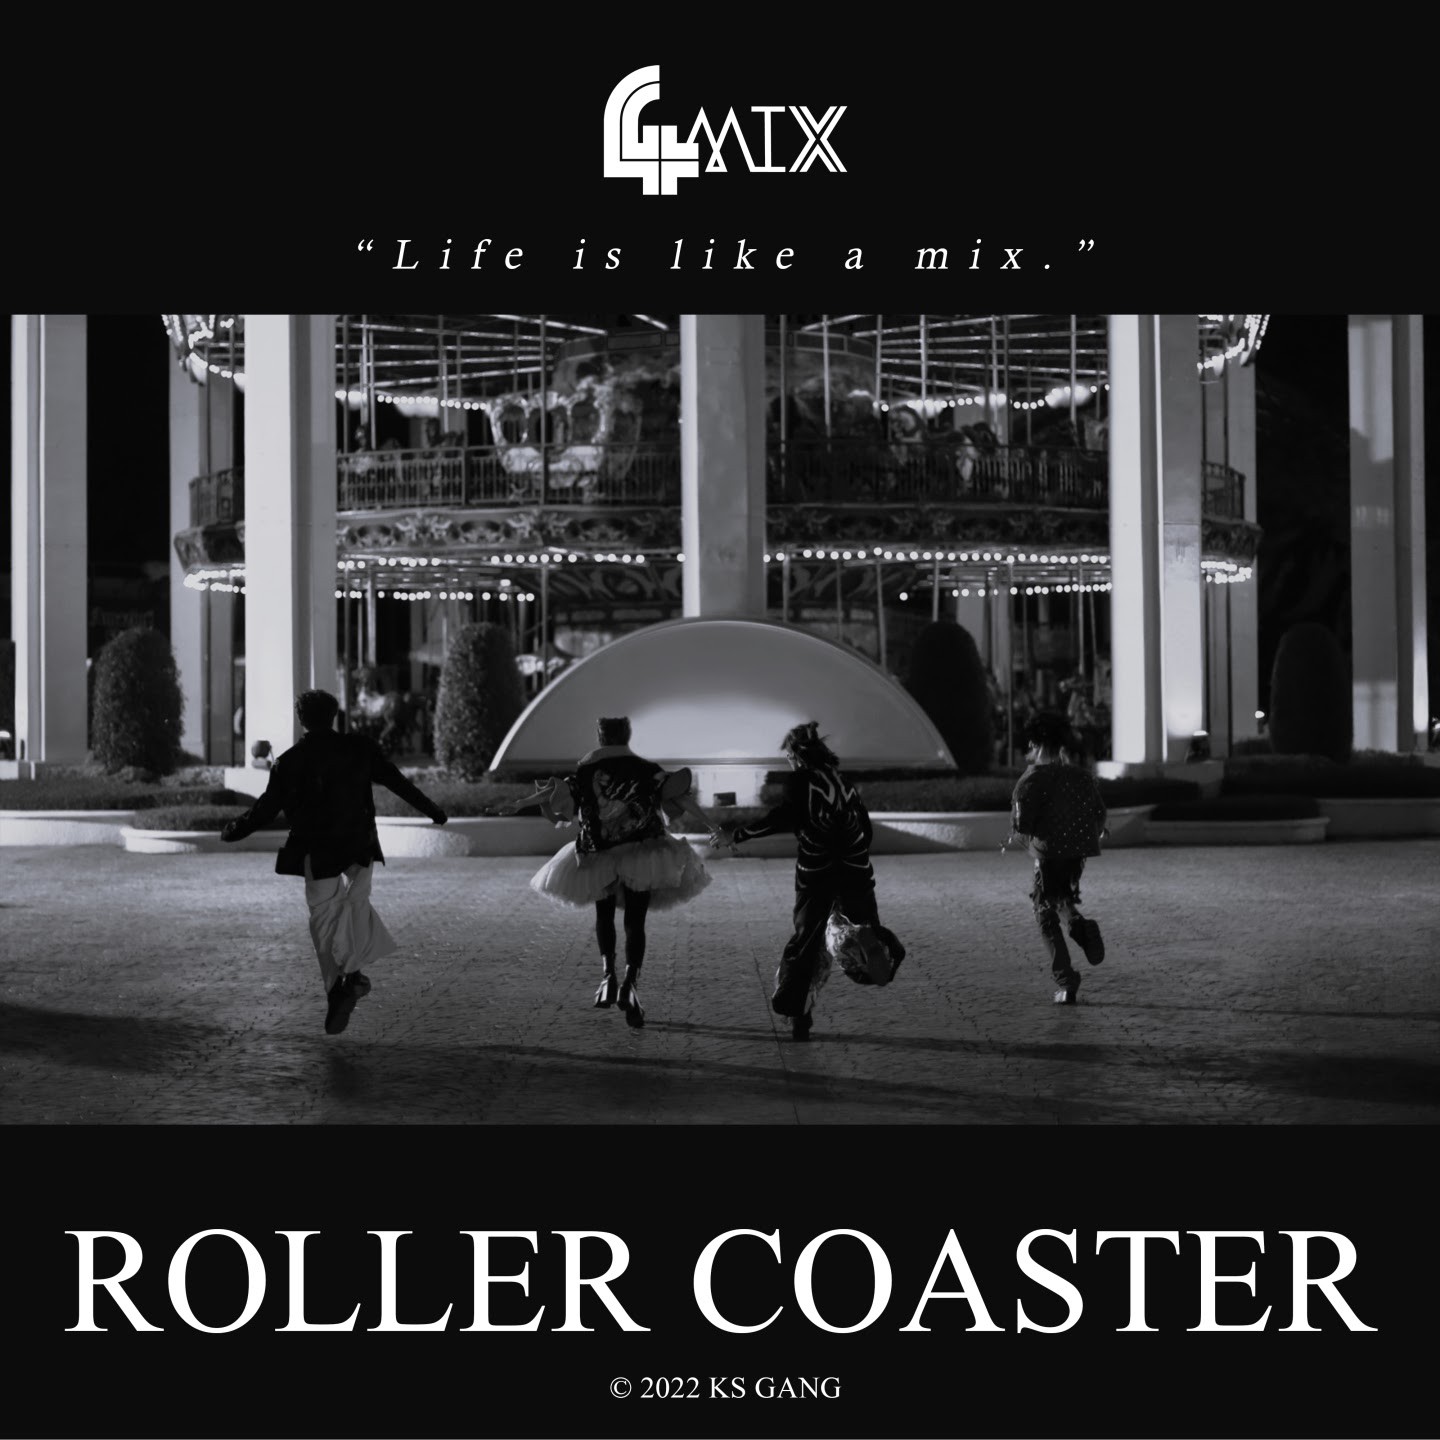 4MIX - Roller Coaster (Spanish Ver.) Cover